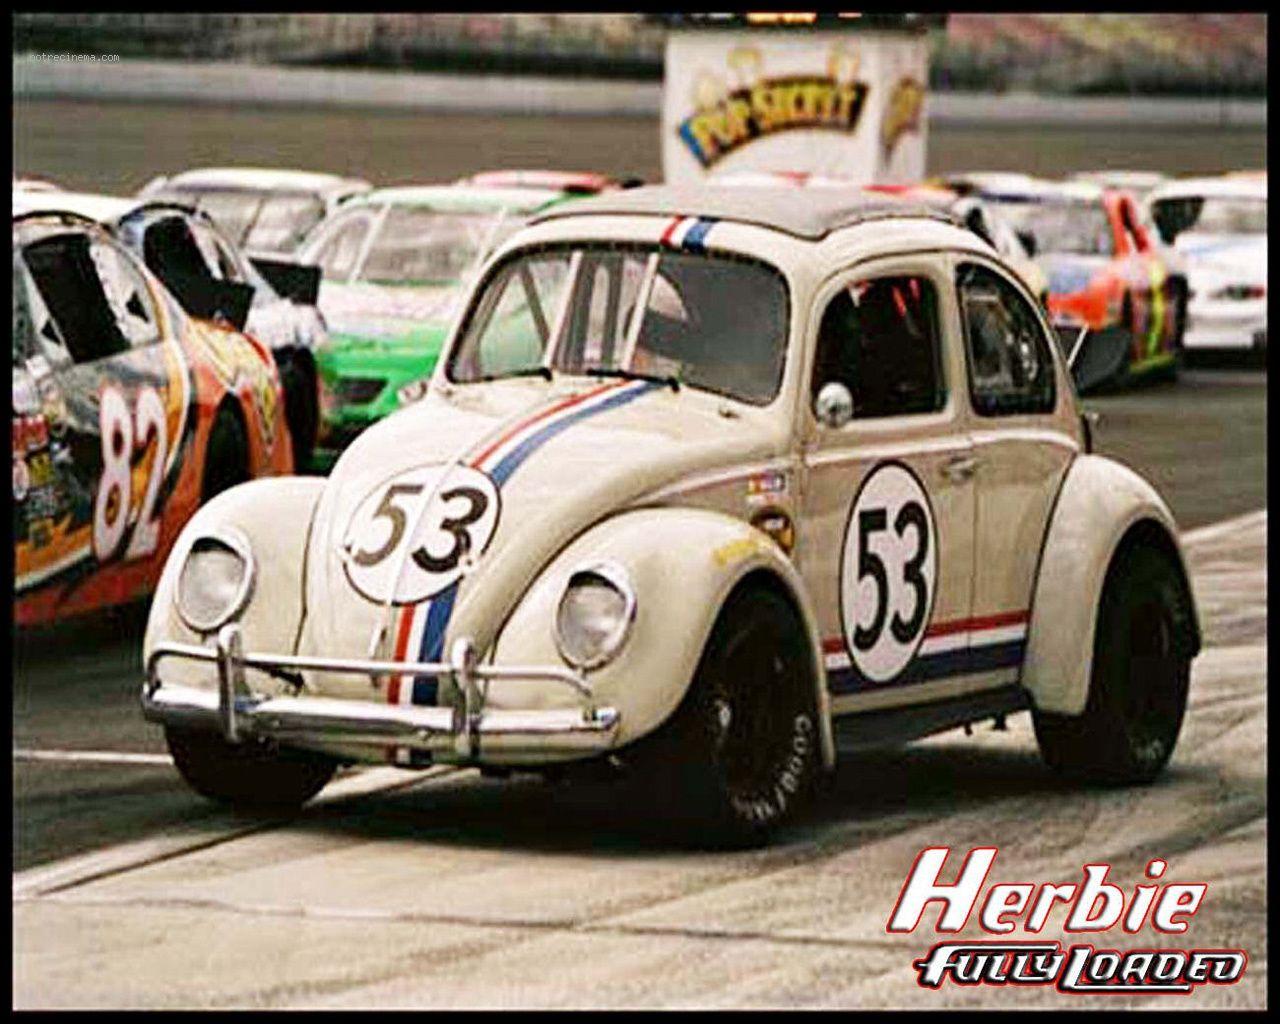 La Coccinelle revient (Herbie fully loaded)